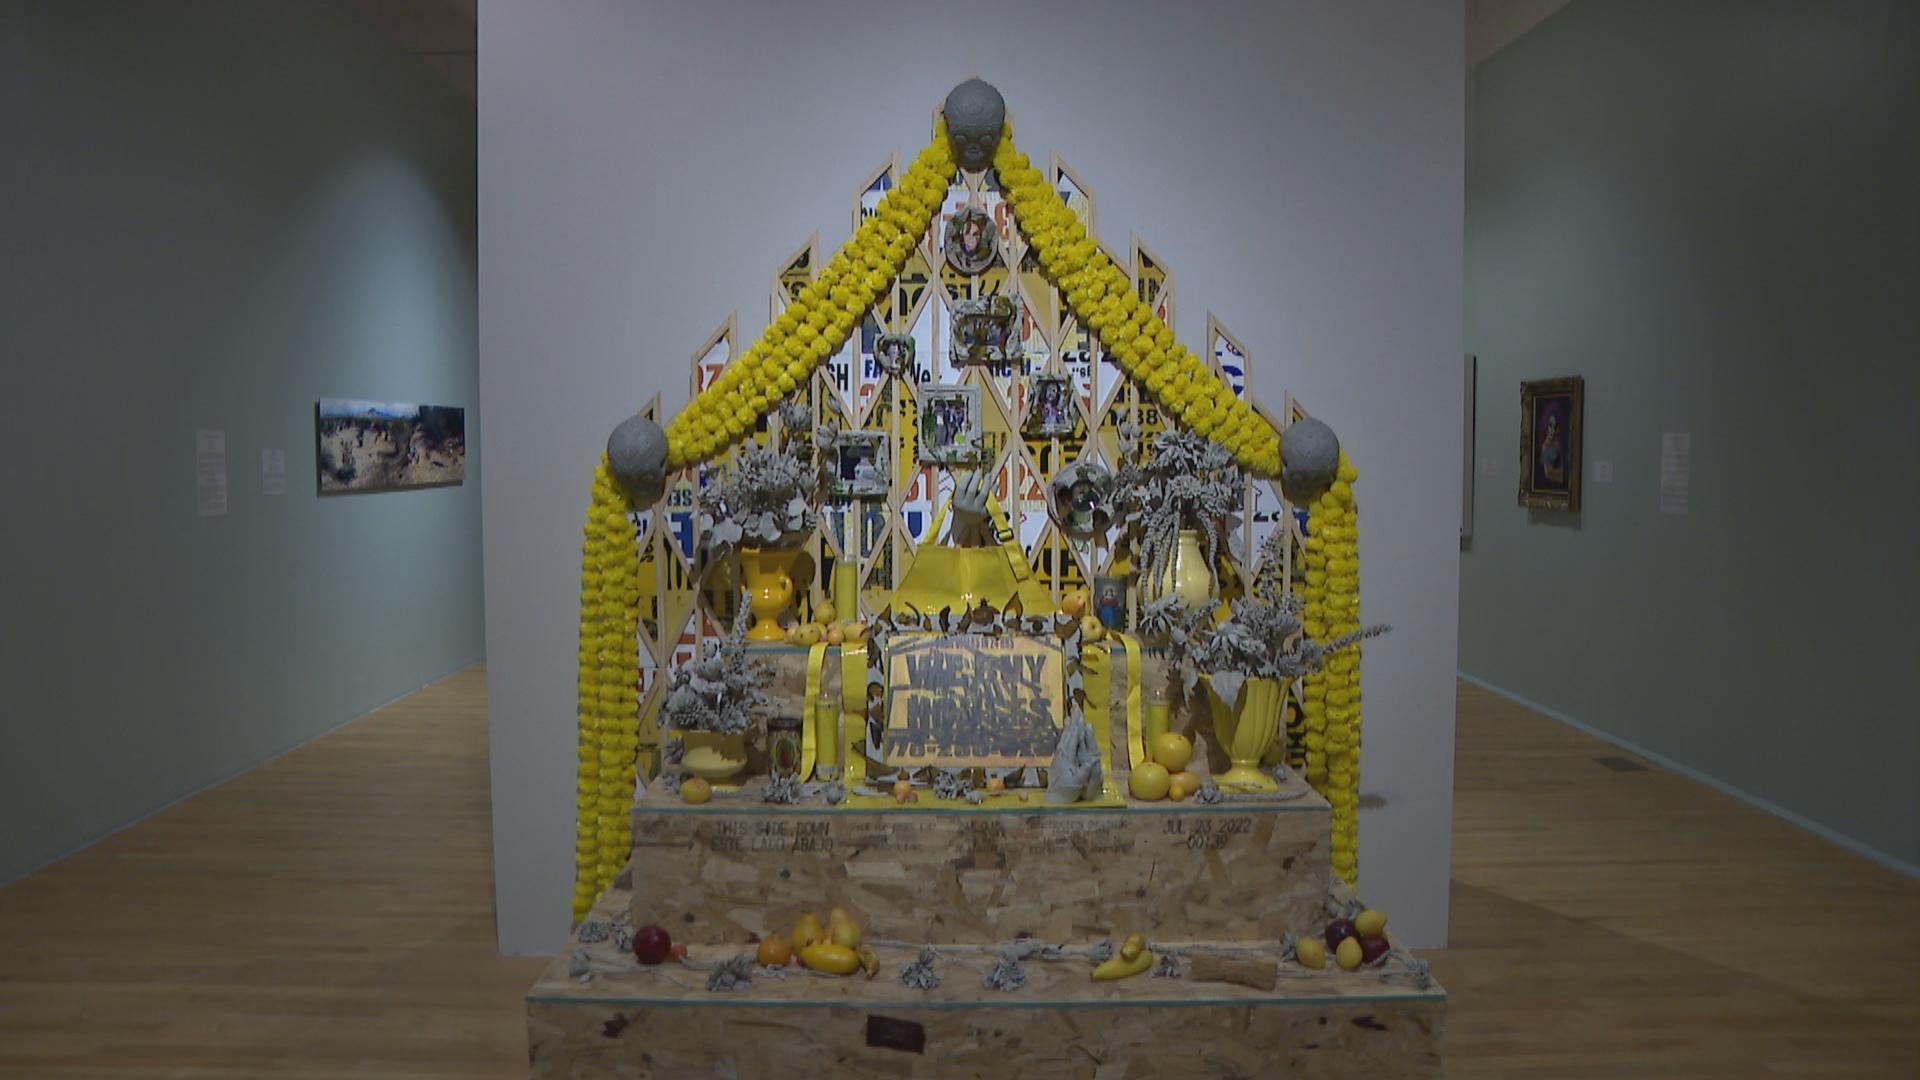 This year’s Día de Muertos exhibit at the National Museum of Mexican Art is titled “Memories & Offerings.” (WTTW News) 